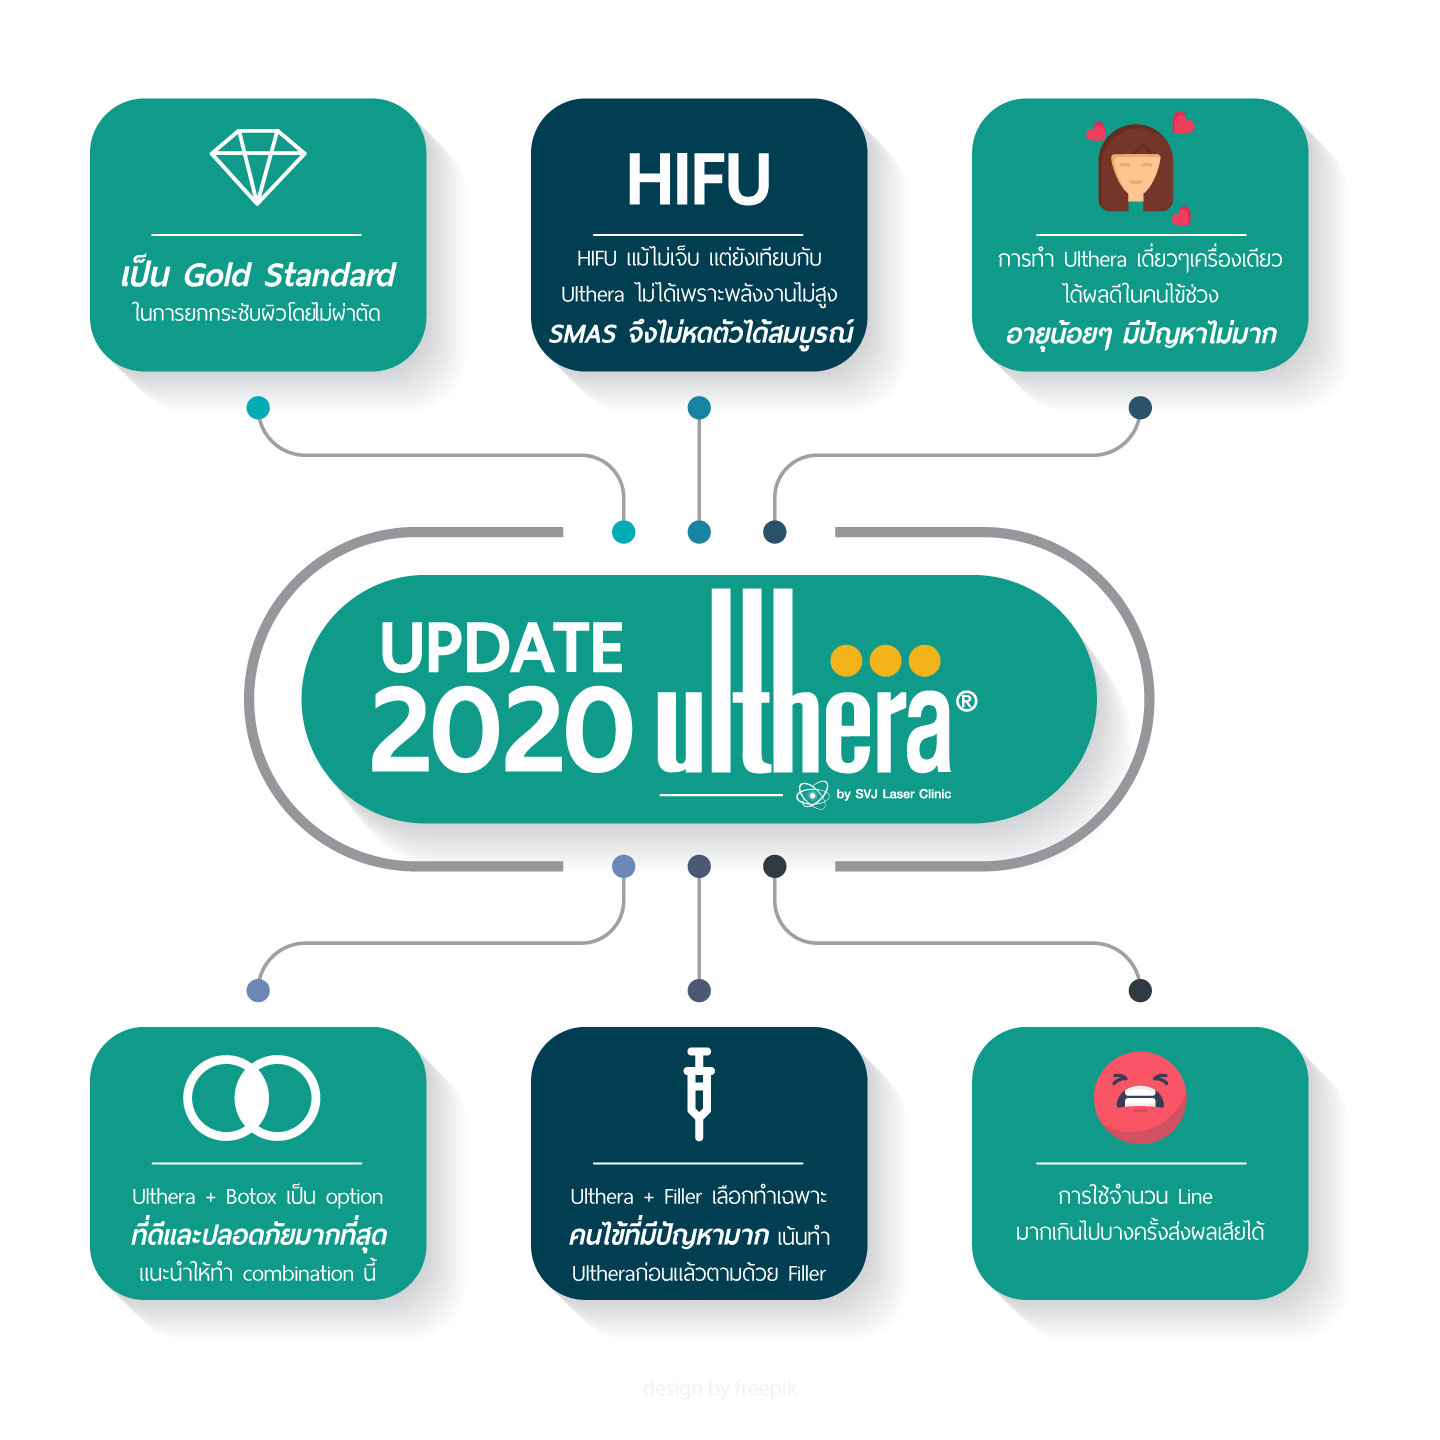 Update Ulthera 2020 by DR. WISIT